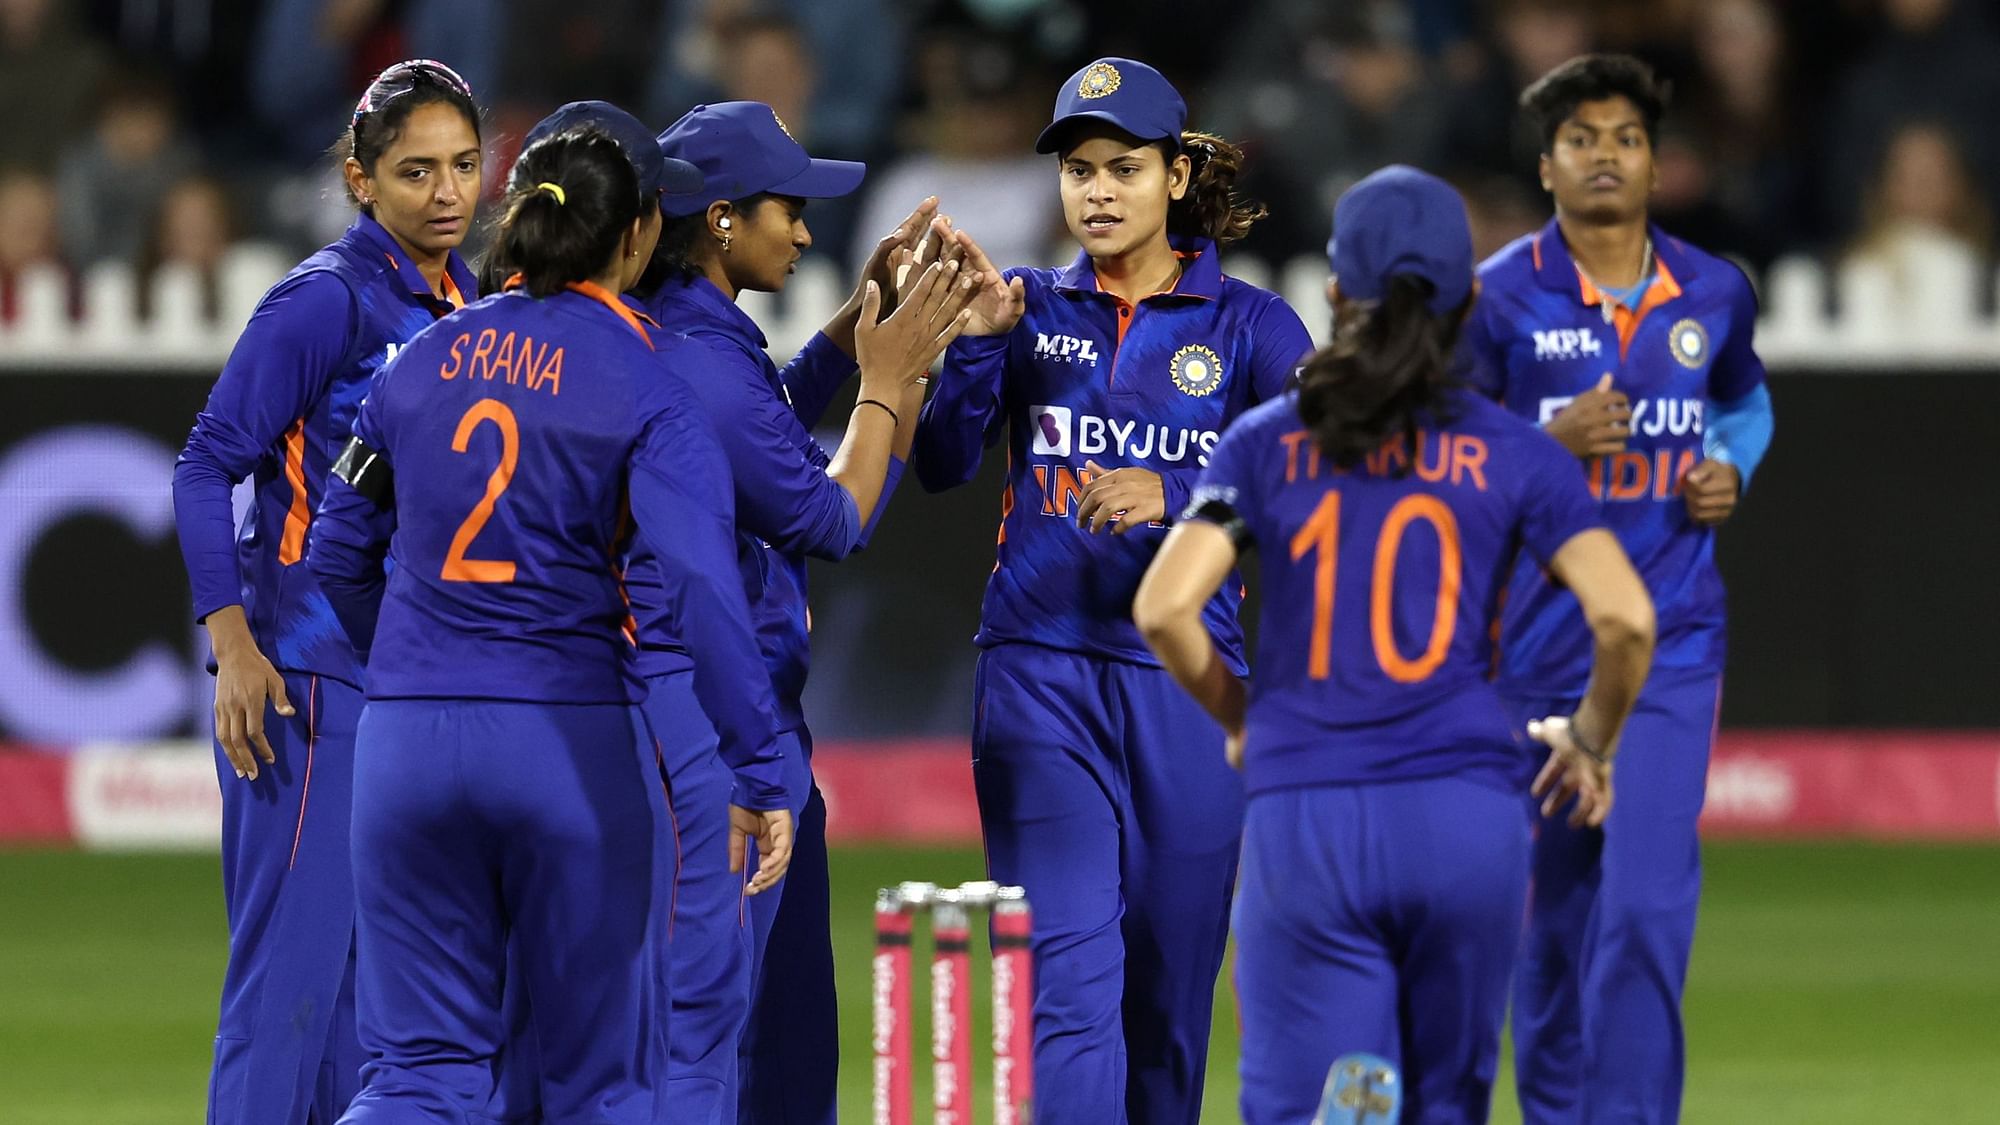 <div class="paragraphs"><p>The eighth edition of ICC T20 Women's World Cup will commence from Friday, 10 February 2023. This year, the ICC T20 Women's World Cup 2023 will be hosted by South Africa.</p></div>